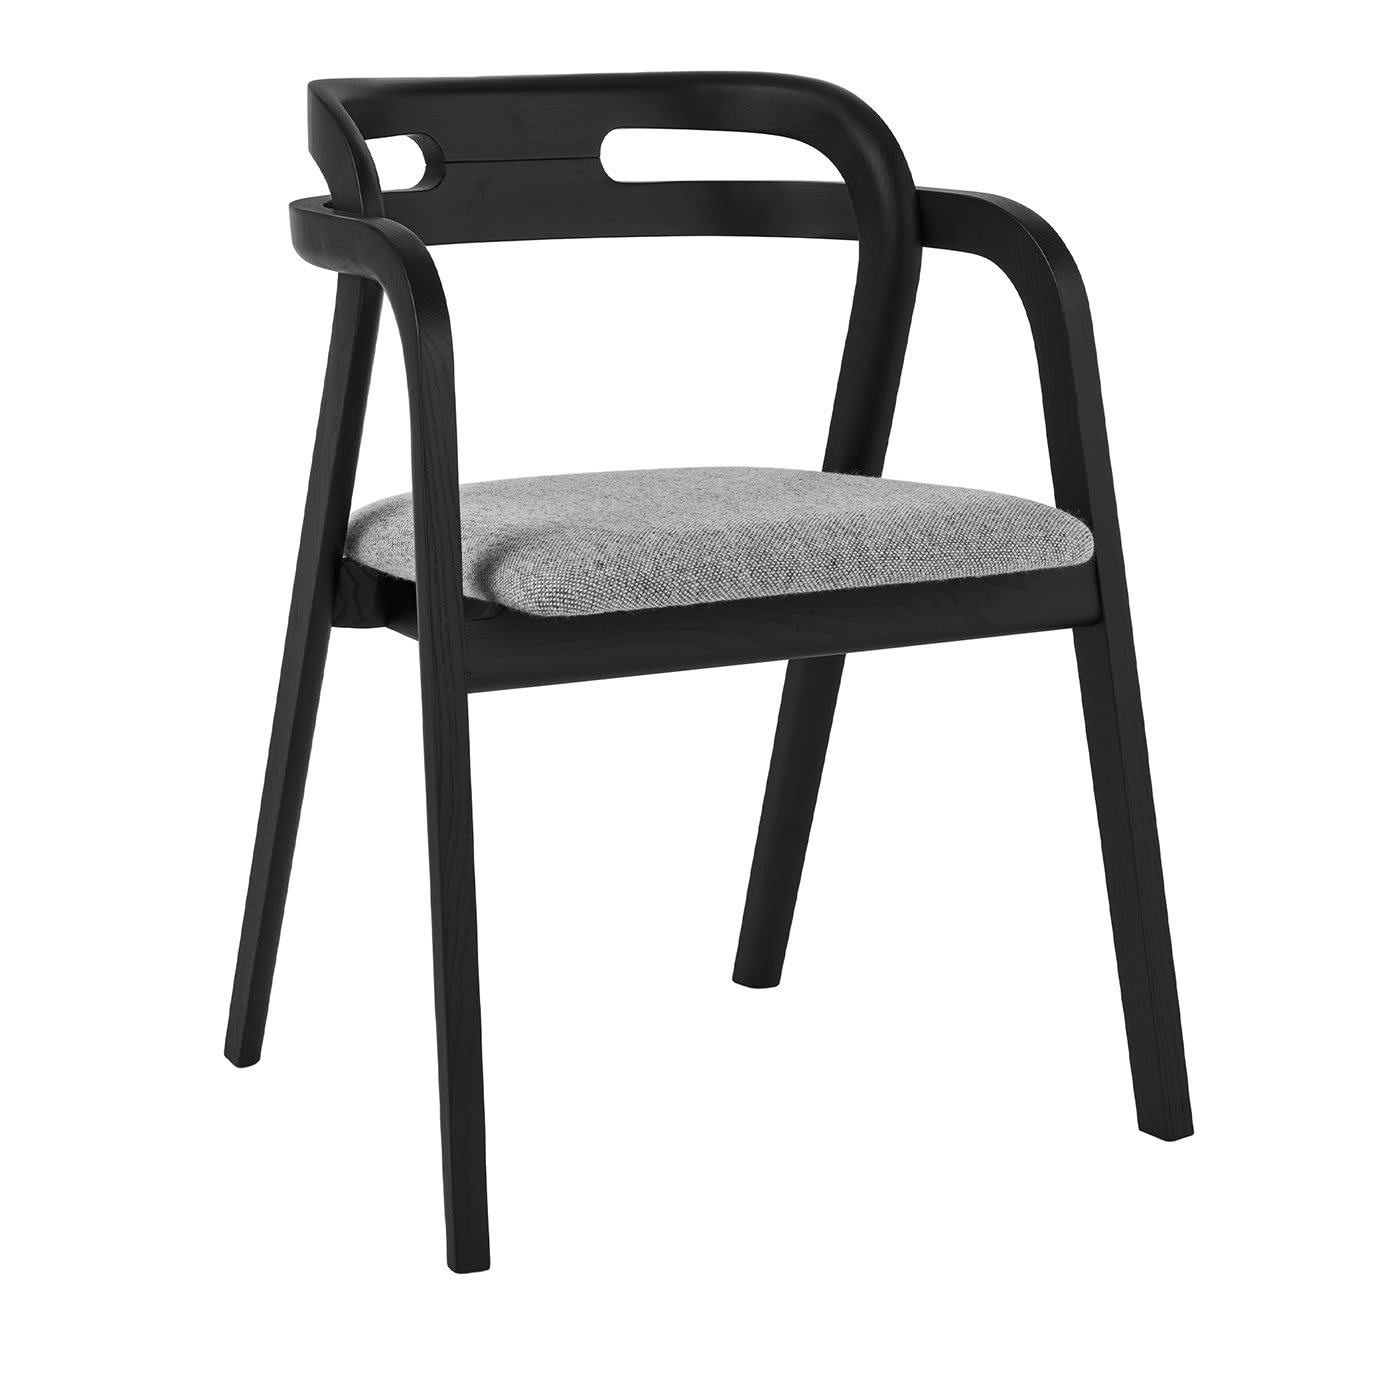 Genea Black Ash Dining chair with Gray Upholstered Seat - Passoni Design